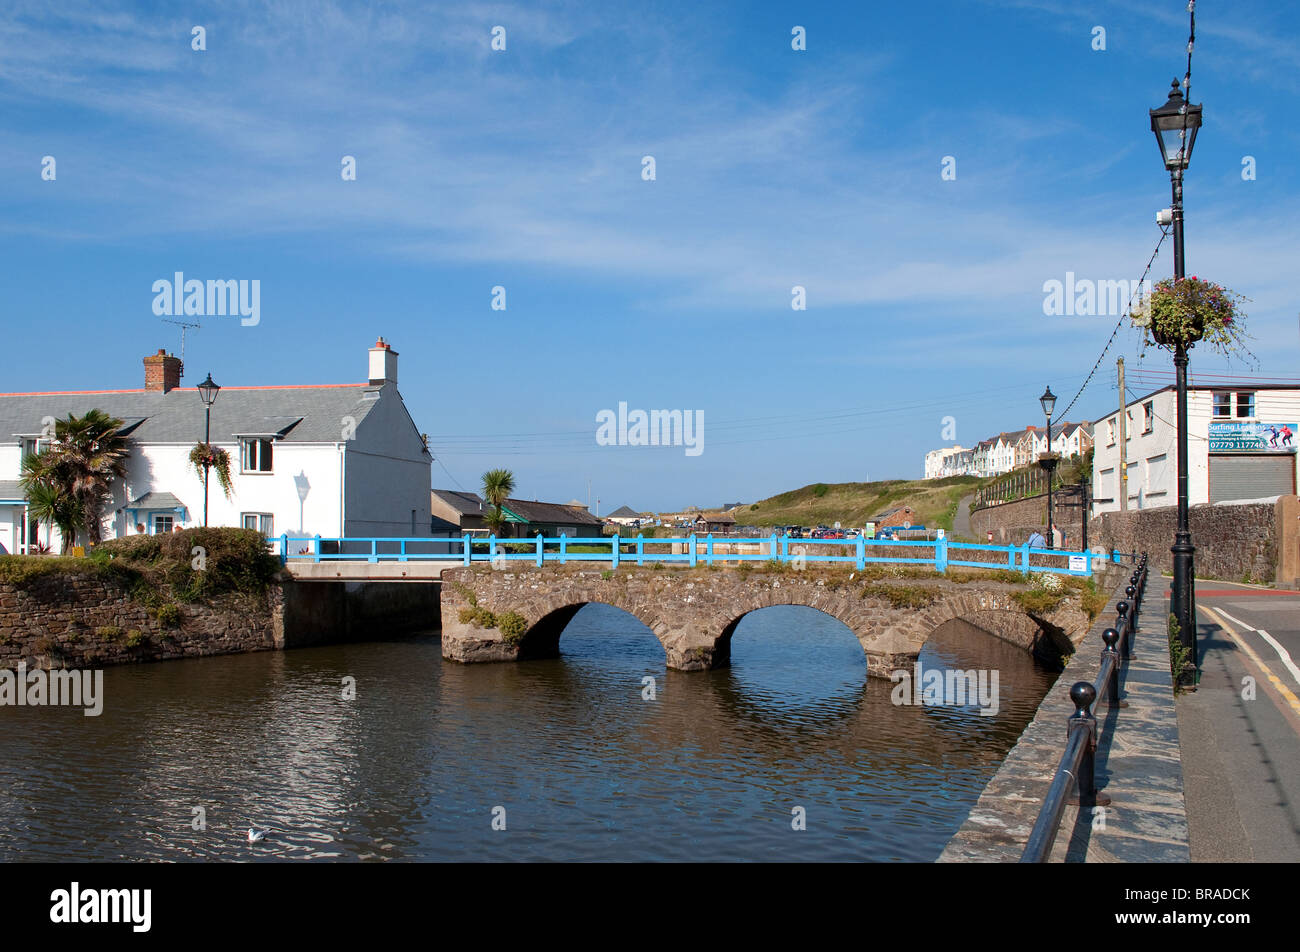 the pretty arched stone bridge over the river neet at bude in cornwall, uk the river empties into the sea at summerleaze beach Stock Photo